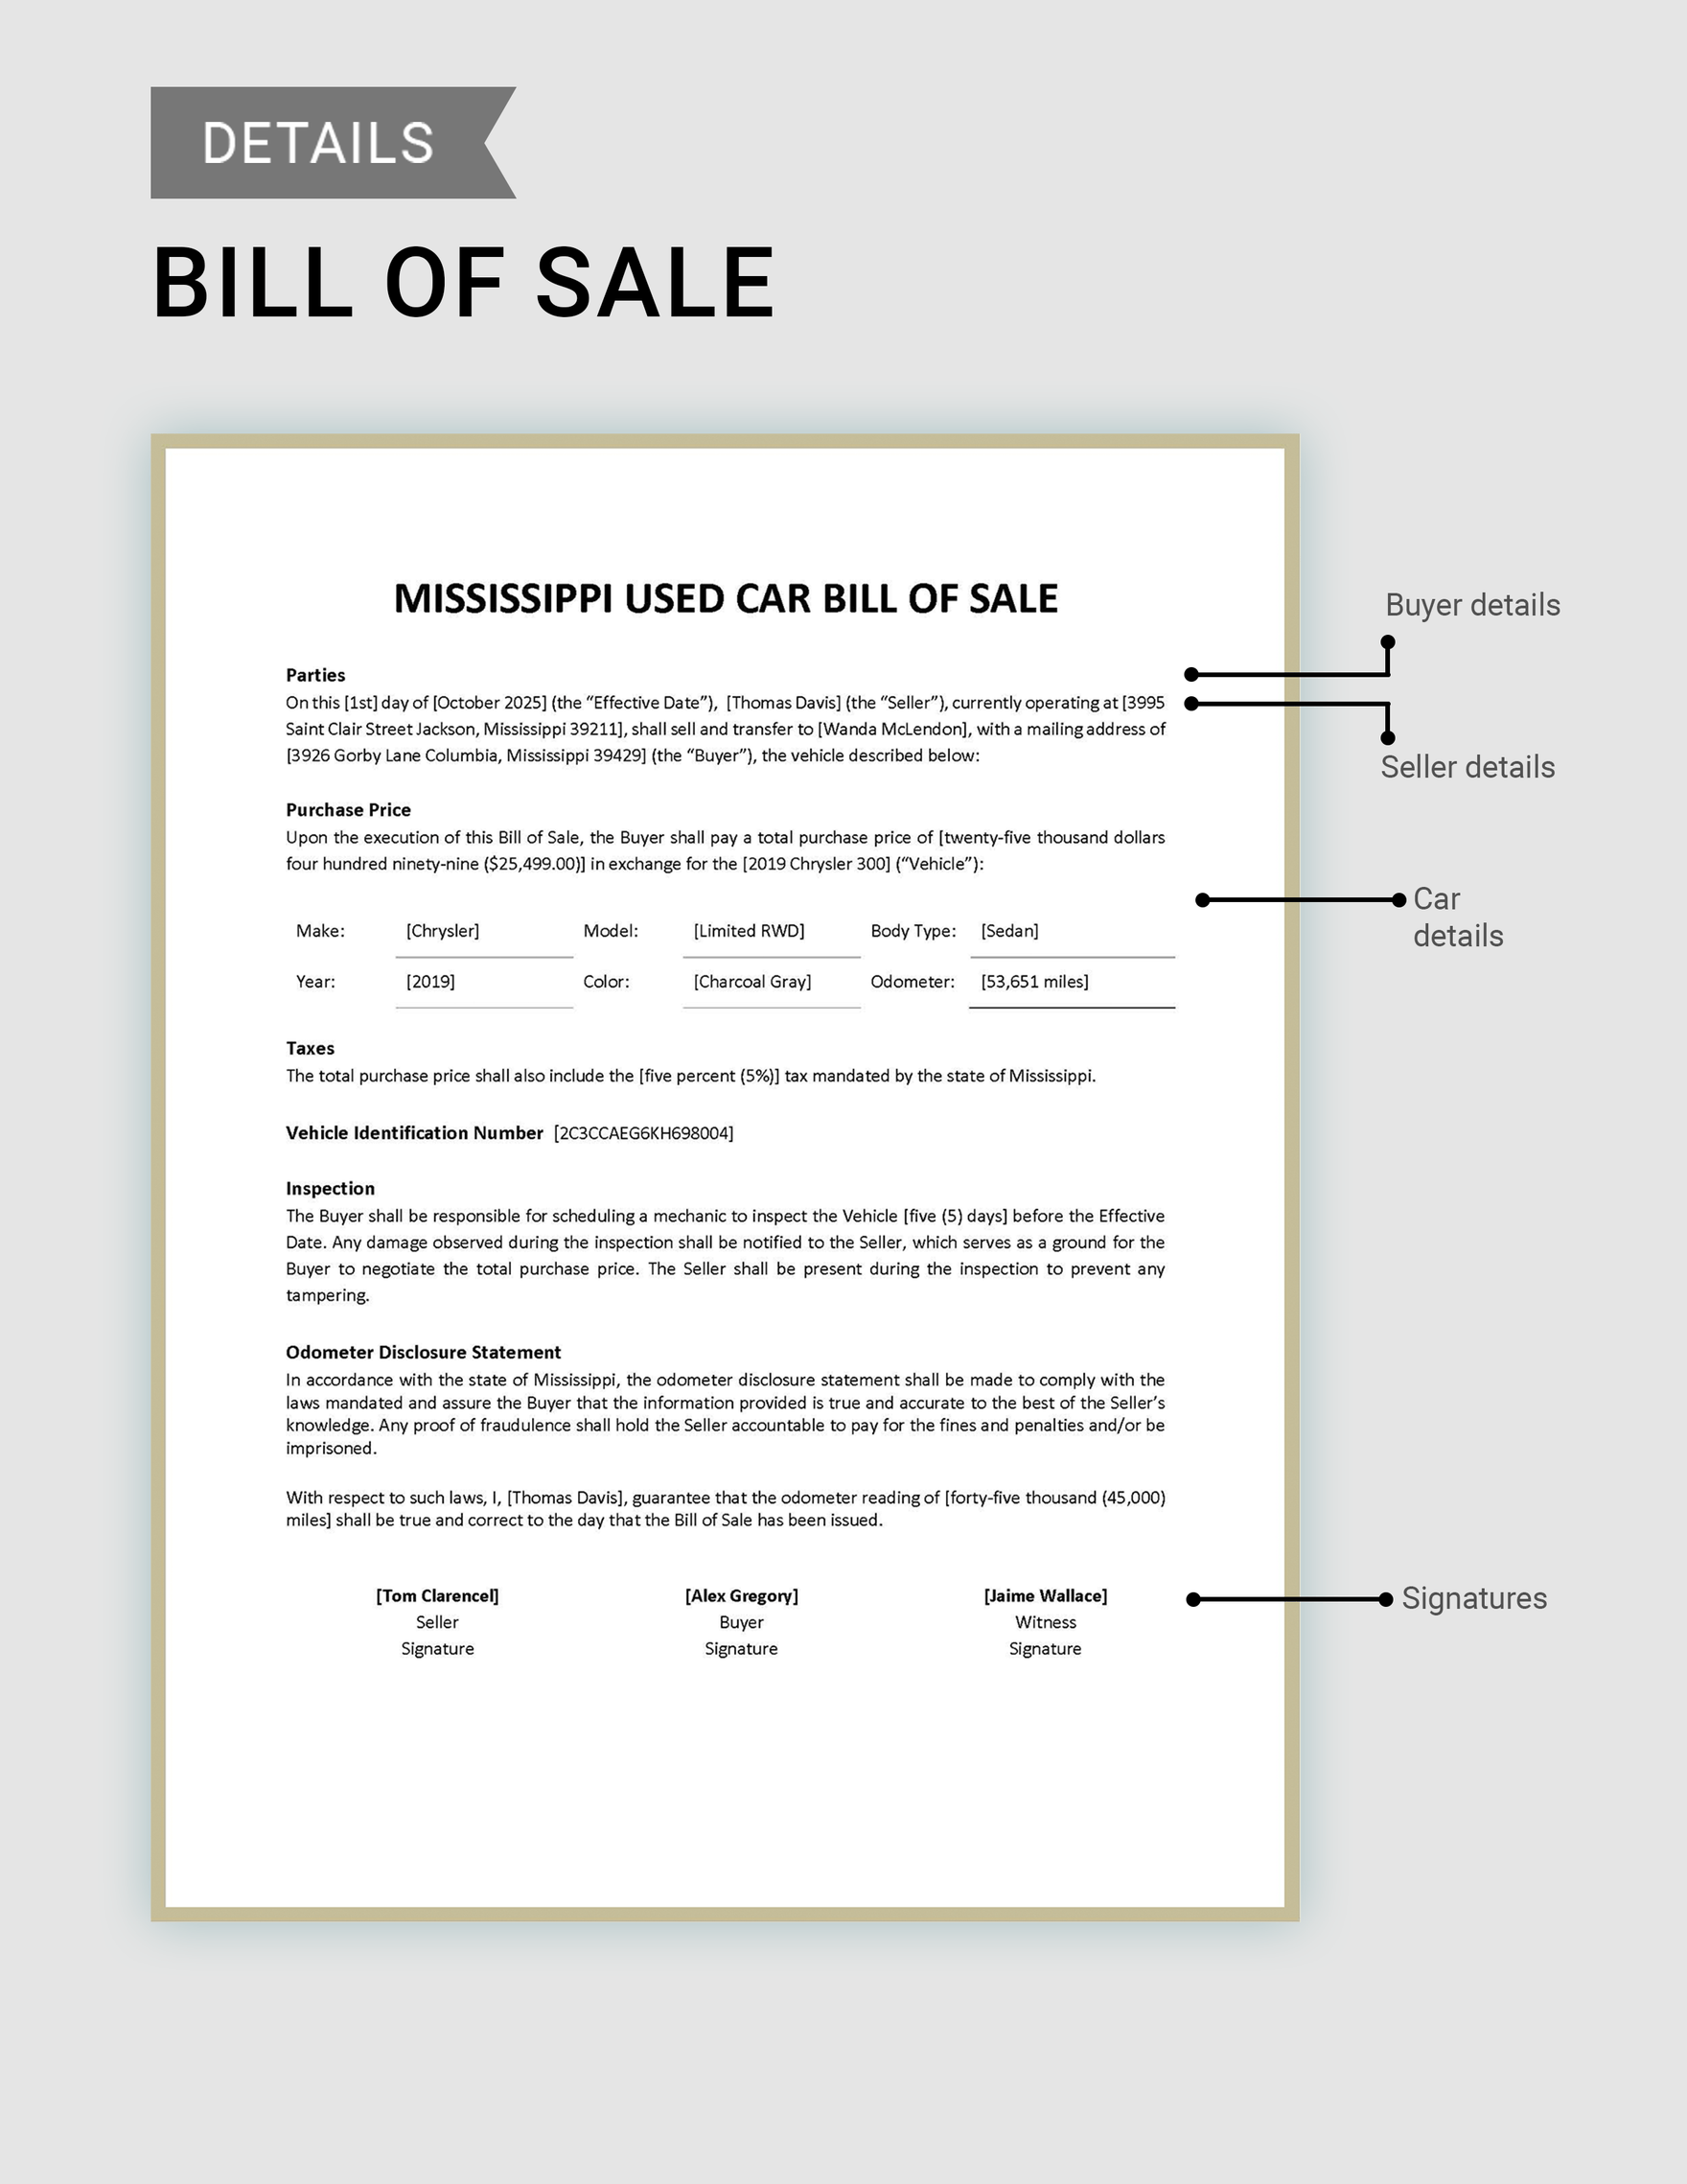 Mississippi Used Car Bill of Sale Form Template in Google Docs PDF